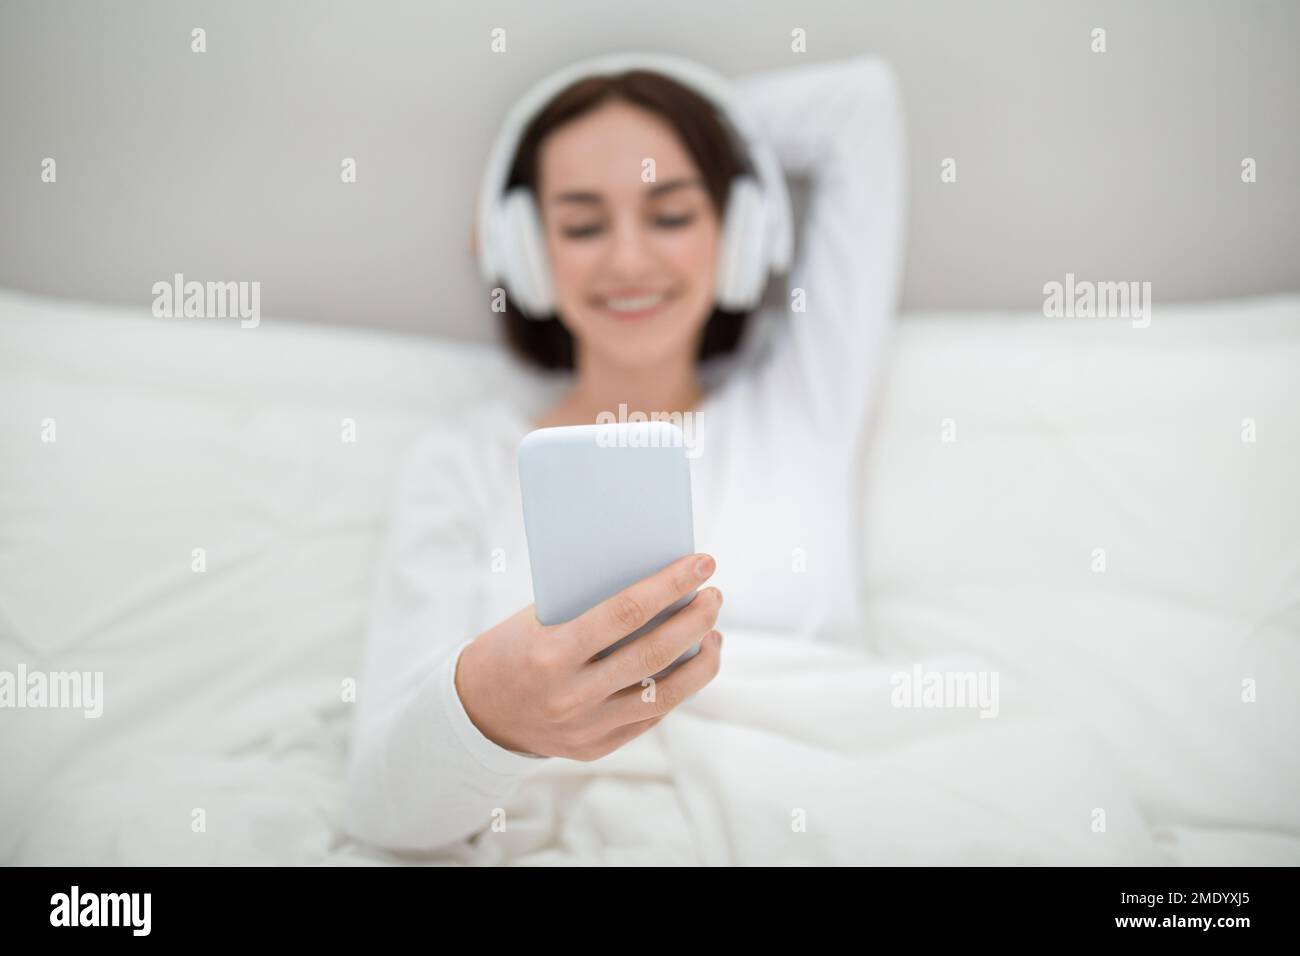 Mobile phone in young woman hand, bedroom interior Stock Photo